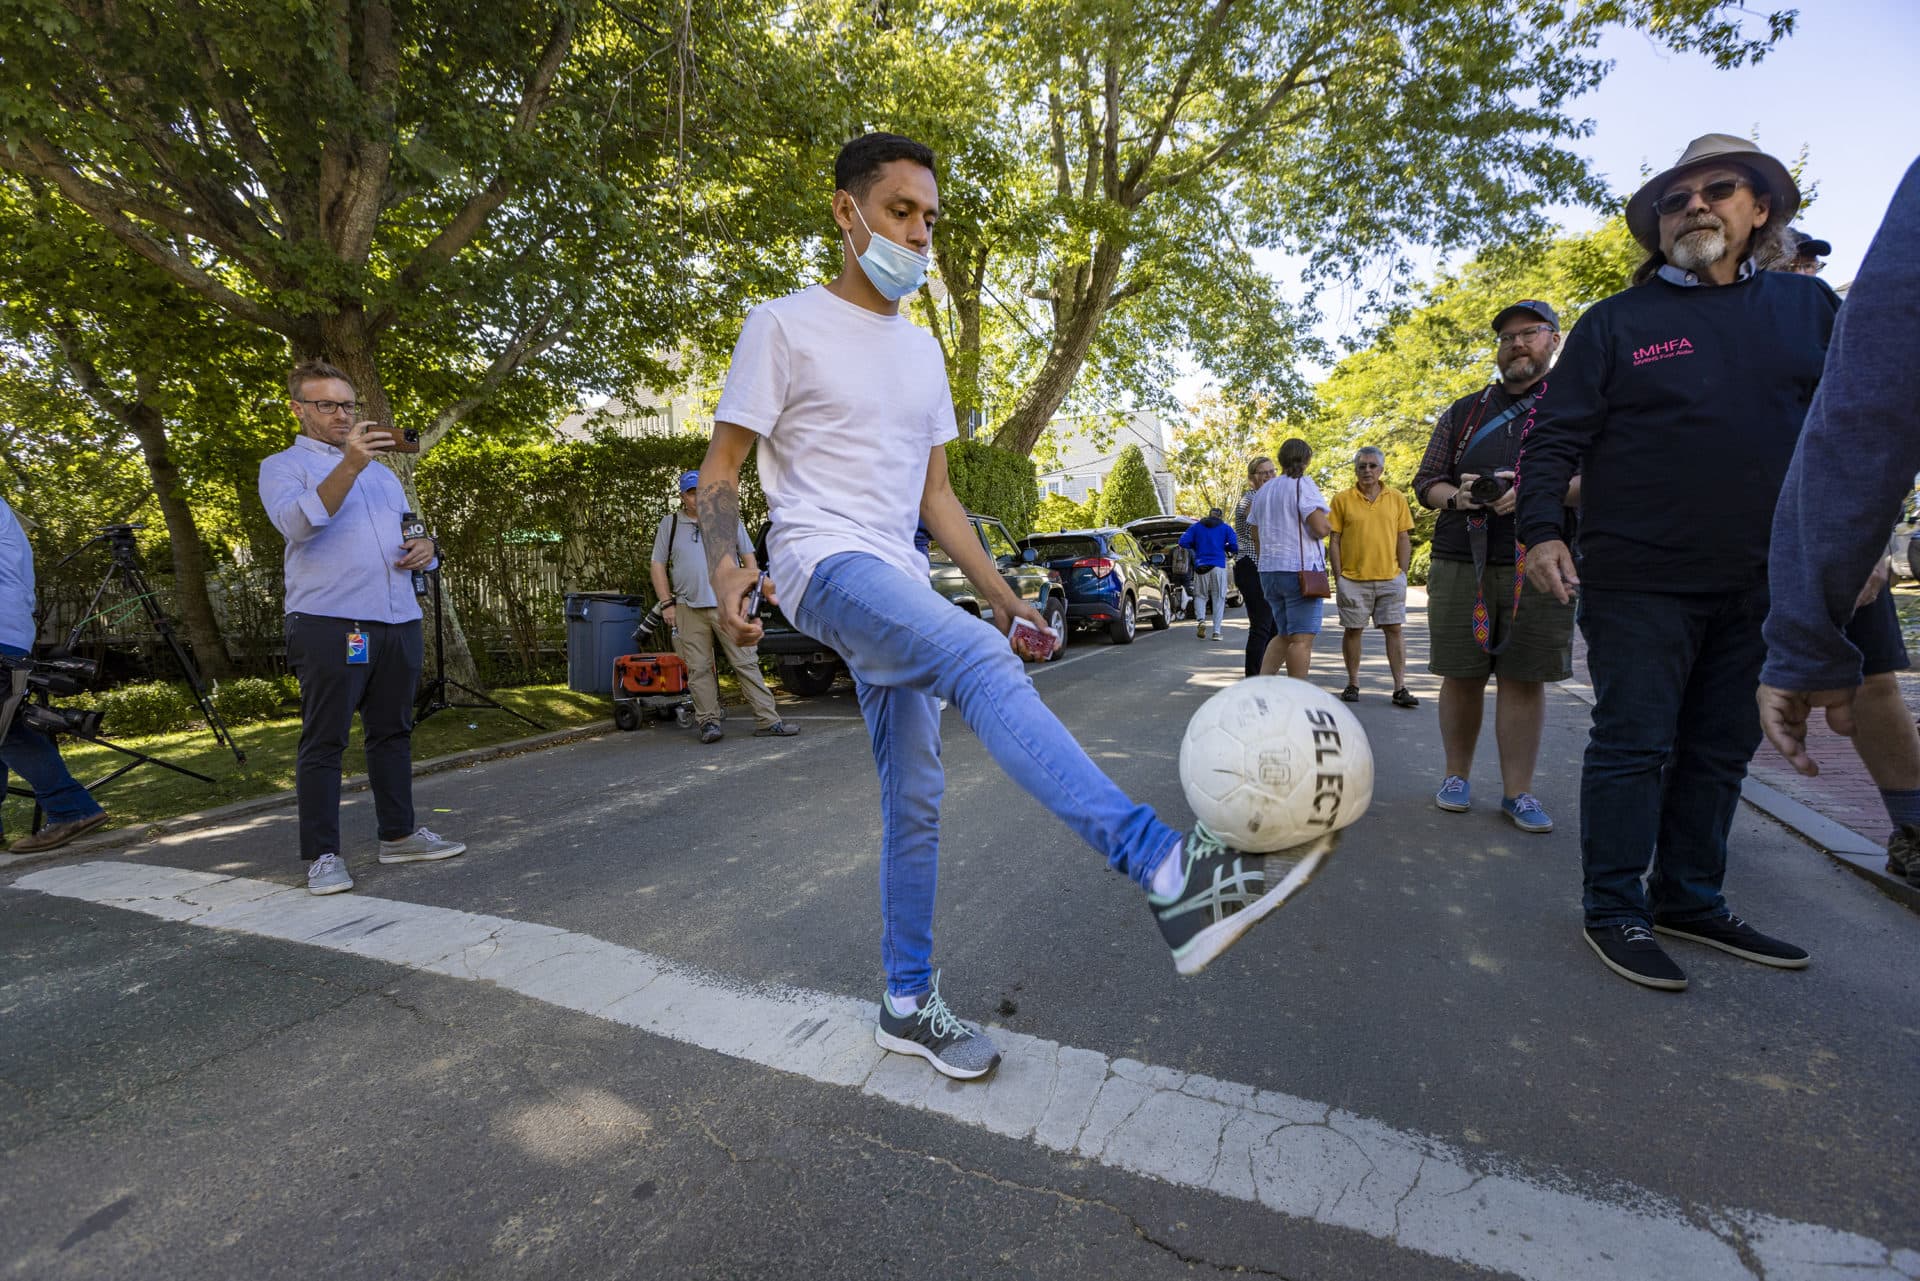 A migrant dribbles with a soccer ball on Winter Street out in front of St. Andrew’s Parish House in Edgartown. (Jesse Costa/WBUR)